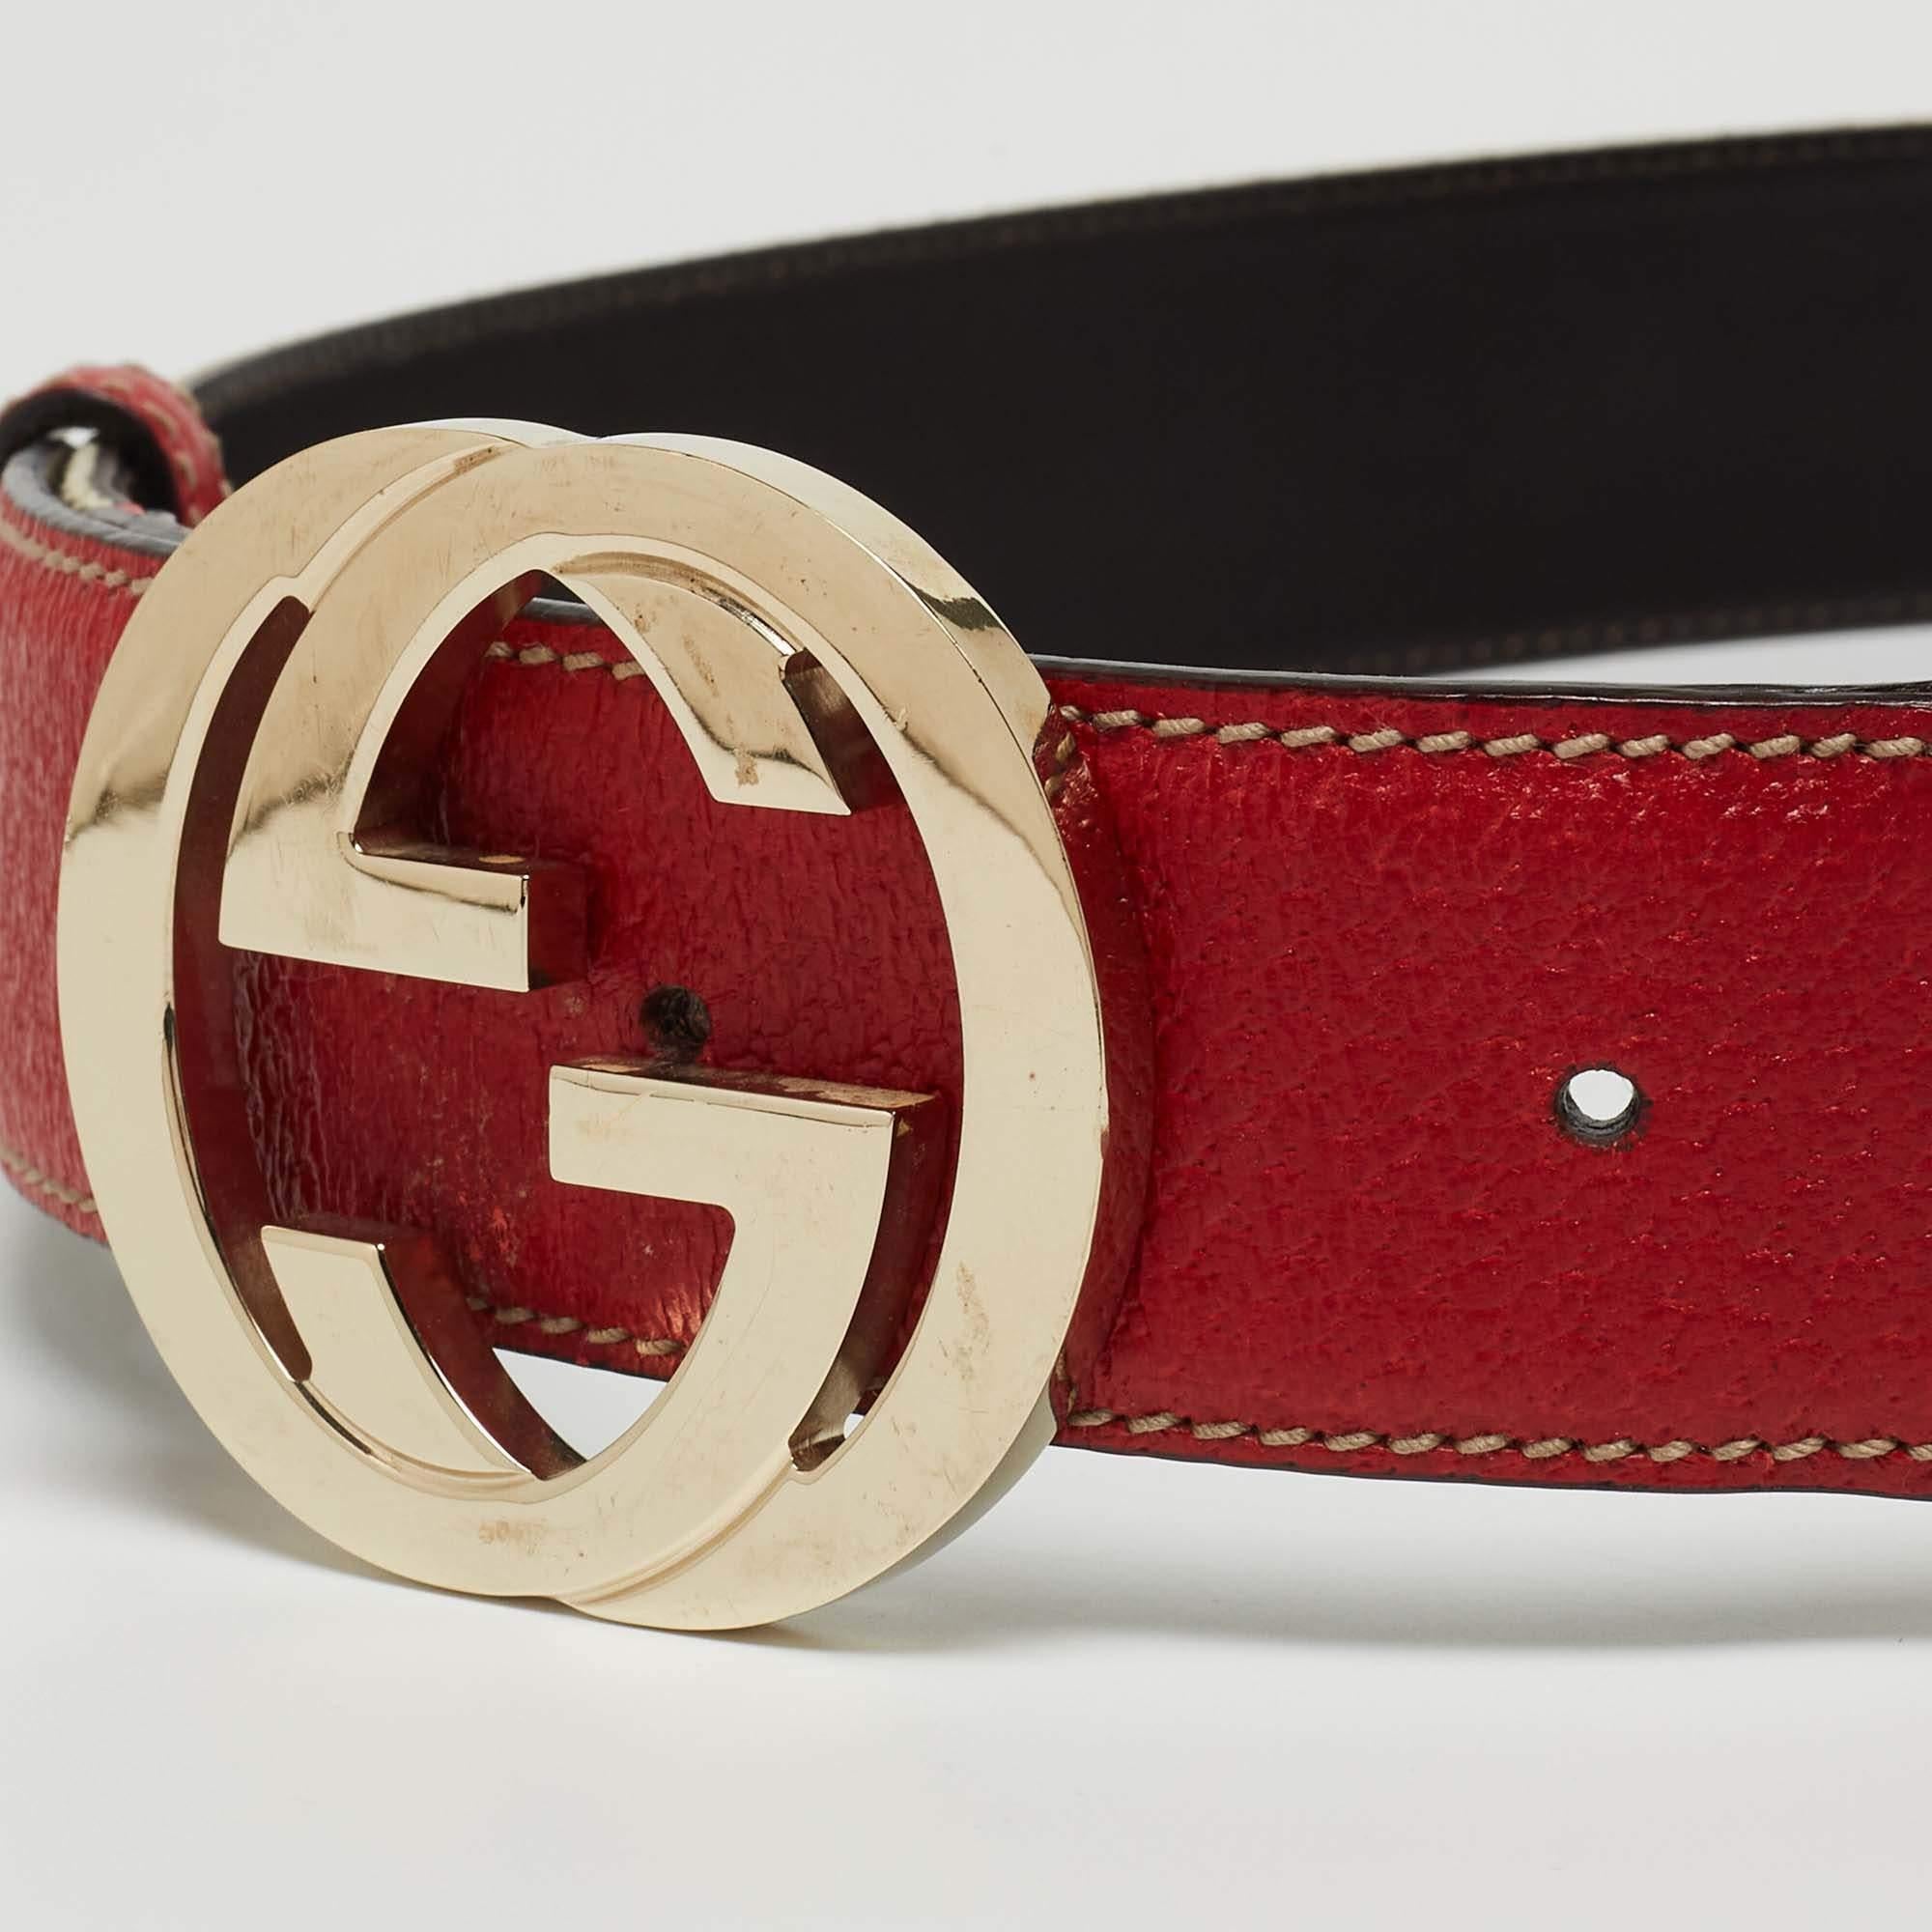 Light up your belt collection by adding this buckle belt from Gucci. Made from canvas and leather, it features the signature web design, and the piece is complete with the iconic interlocking G buckle in gold-tone, accompanied by a single loop. This